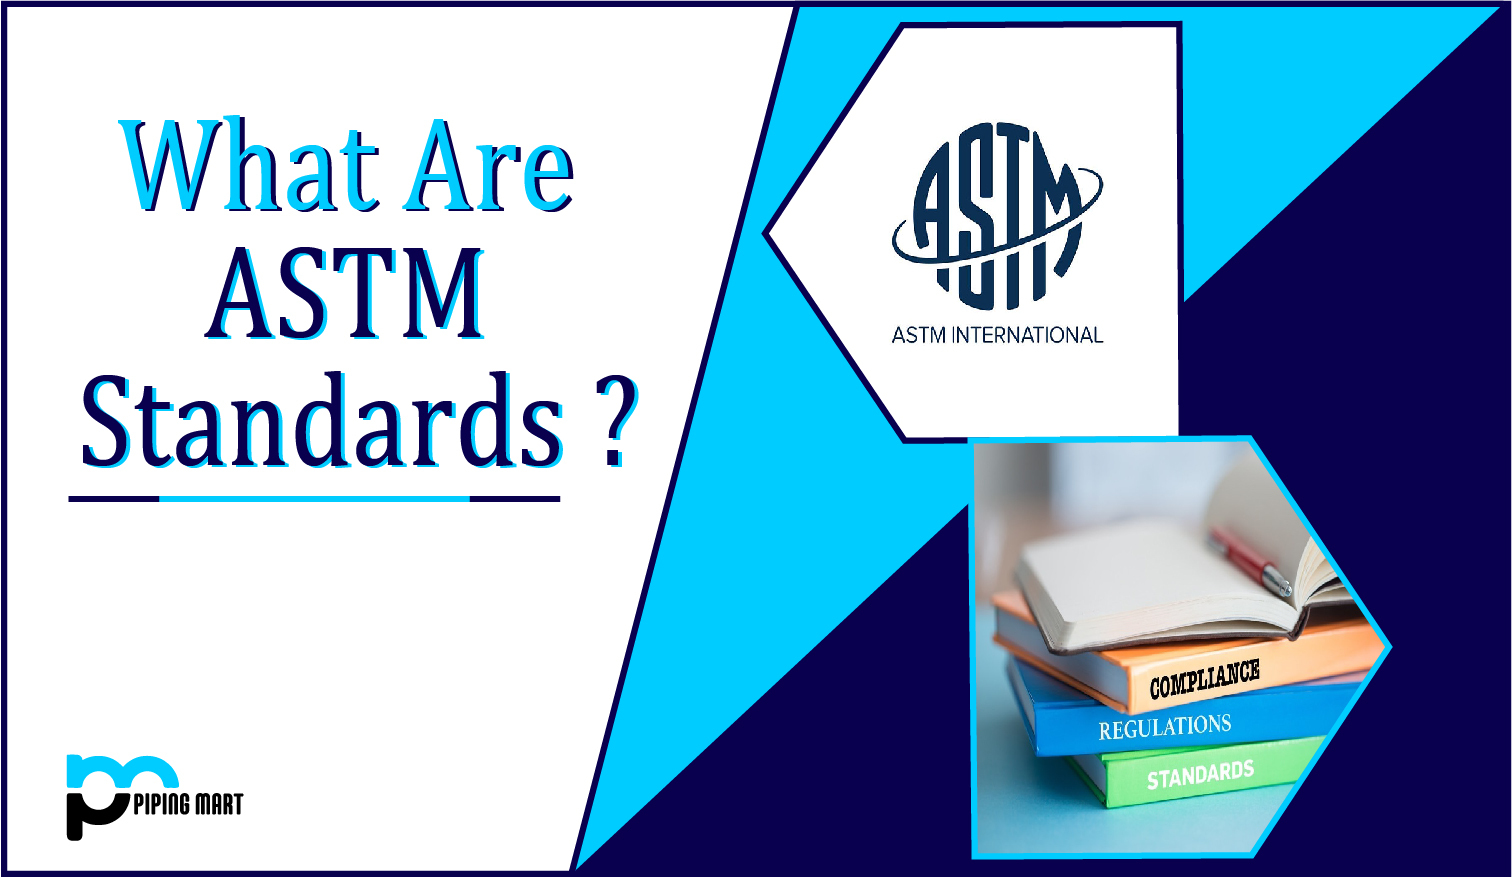 What Are ASTM Standards?